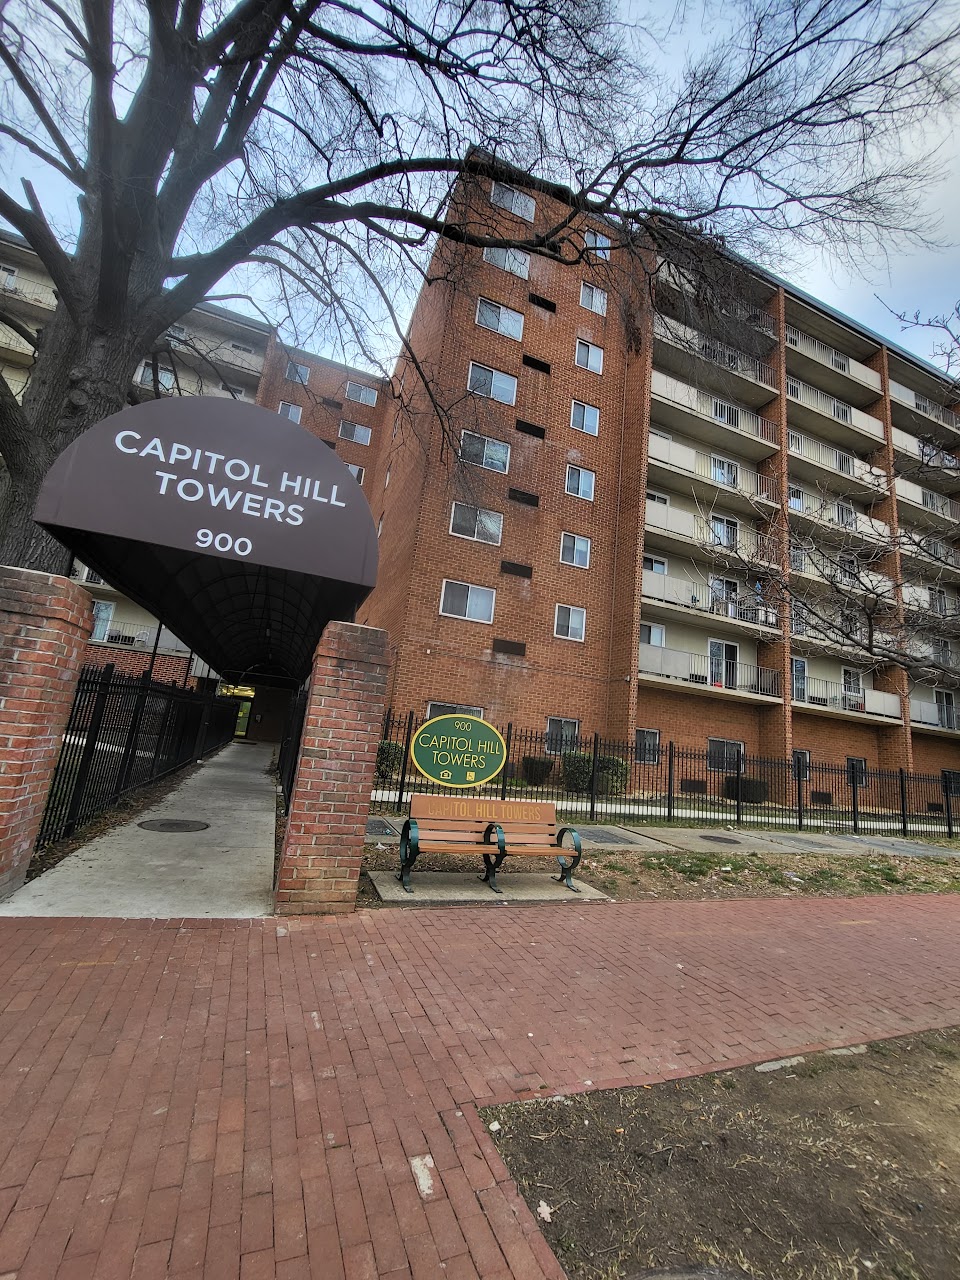 Photo of CAPITOL HILL TOWERS. Affordable housing located at 900 G ST NE WASHINGTON, DC 20002